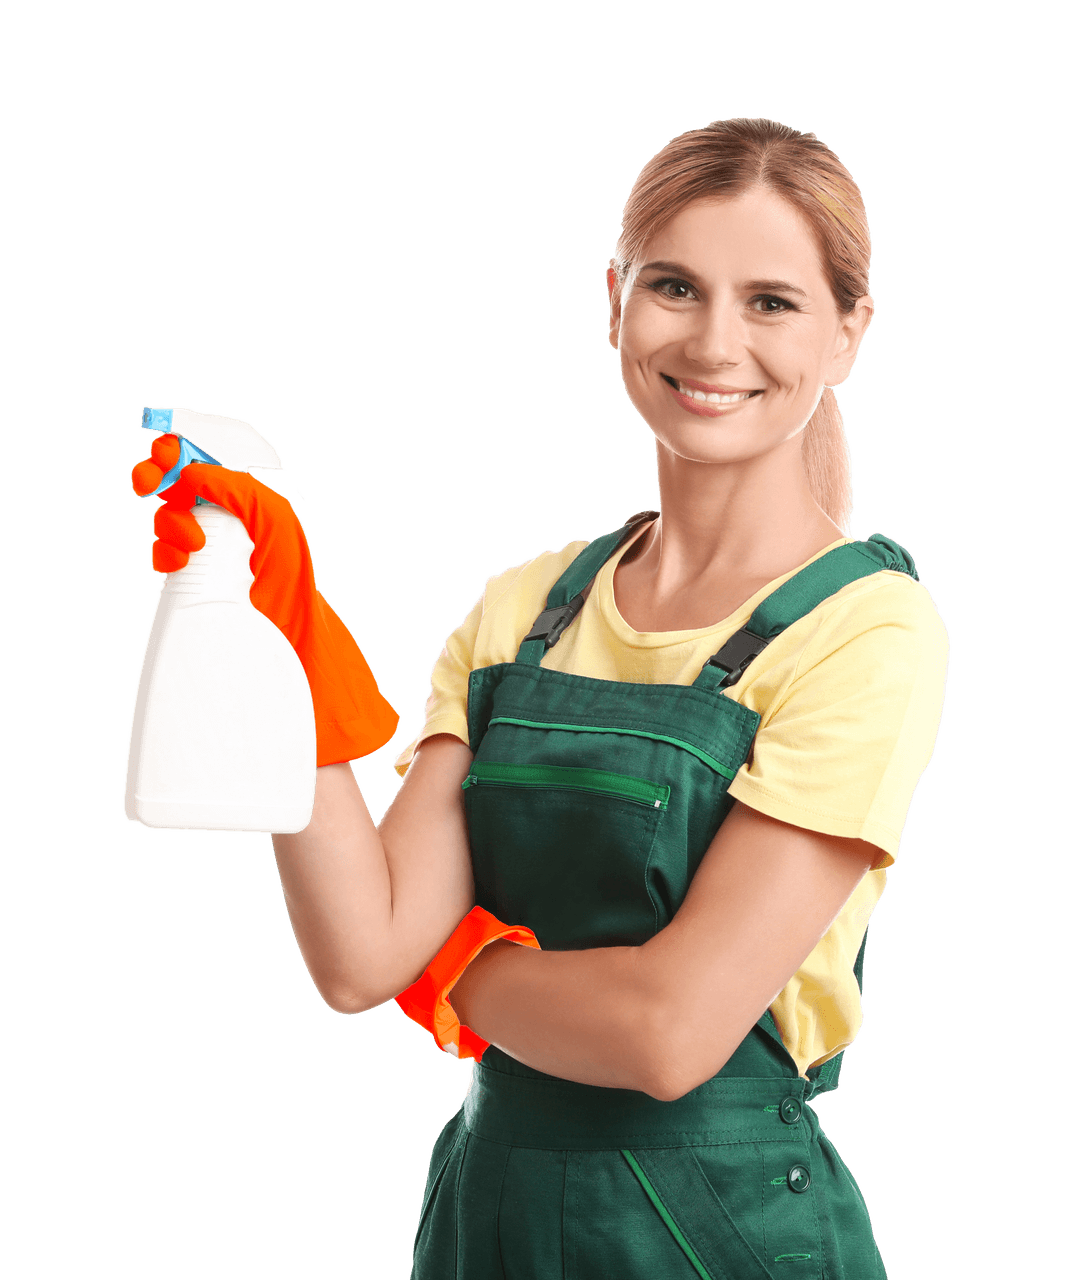 image of Professional Home Cleaners in York wearing cleaning clothes